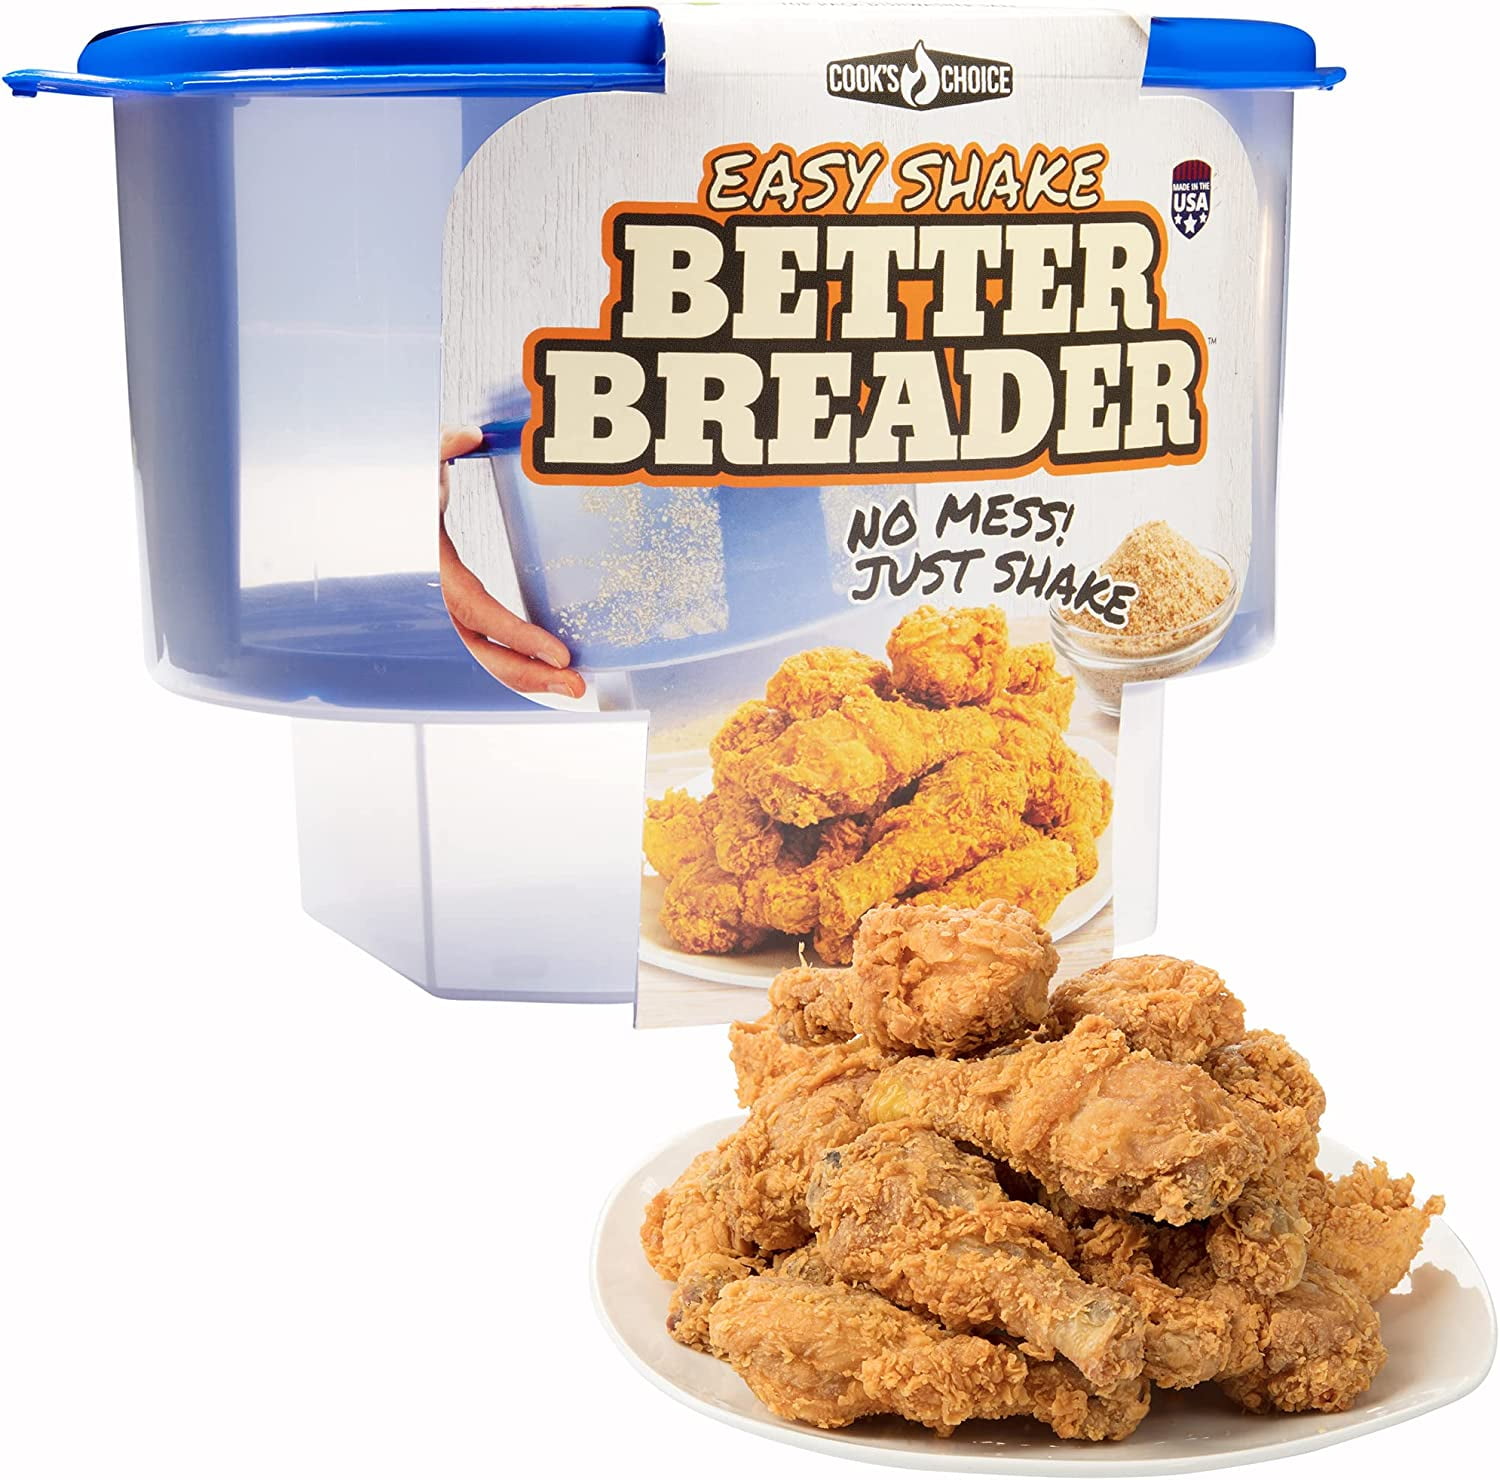 Cook's Choice Better Breader easily breads and seasons meats and